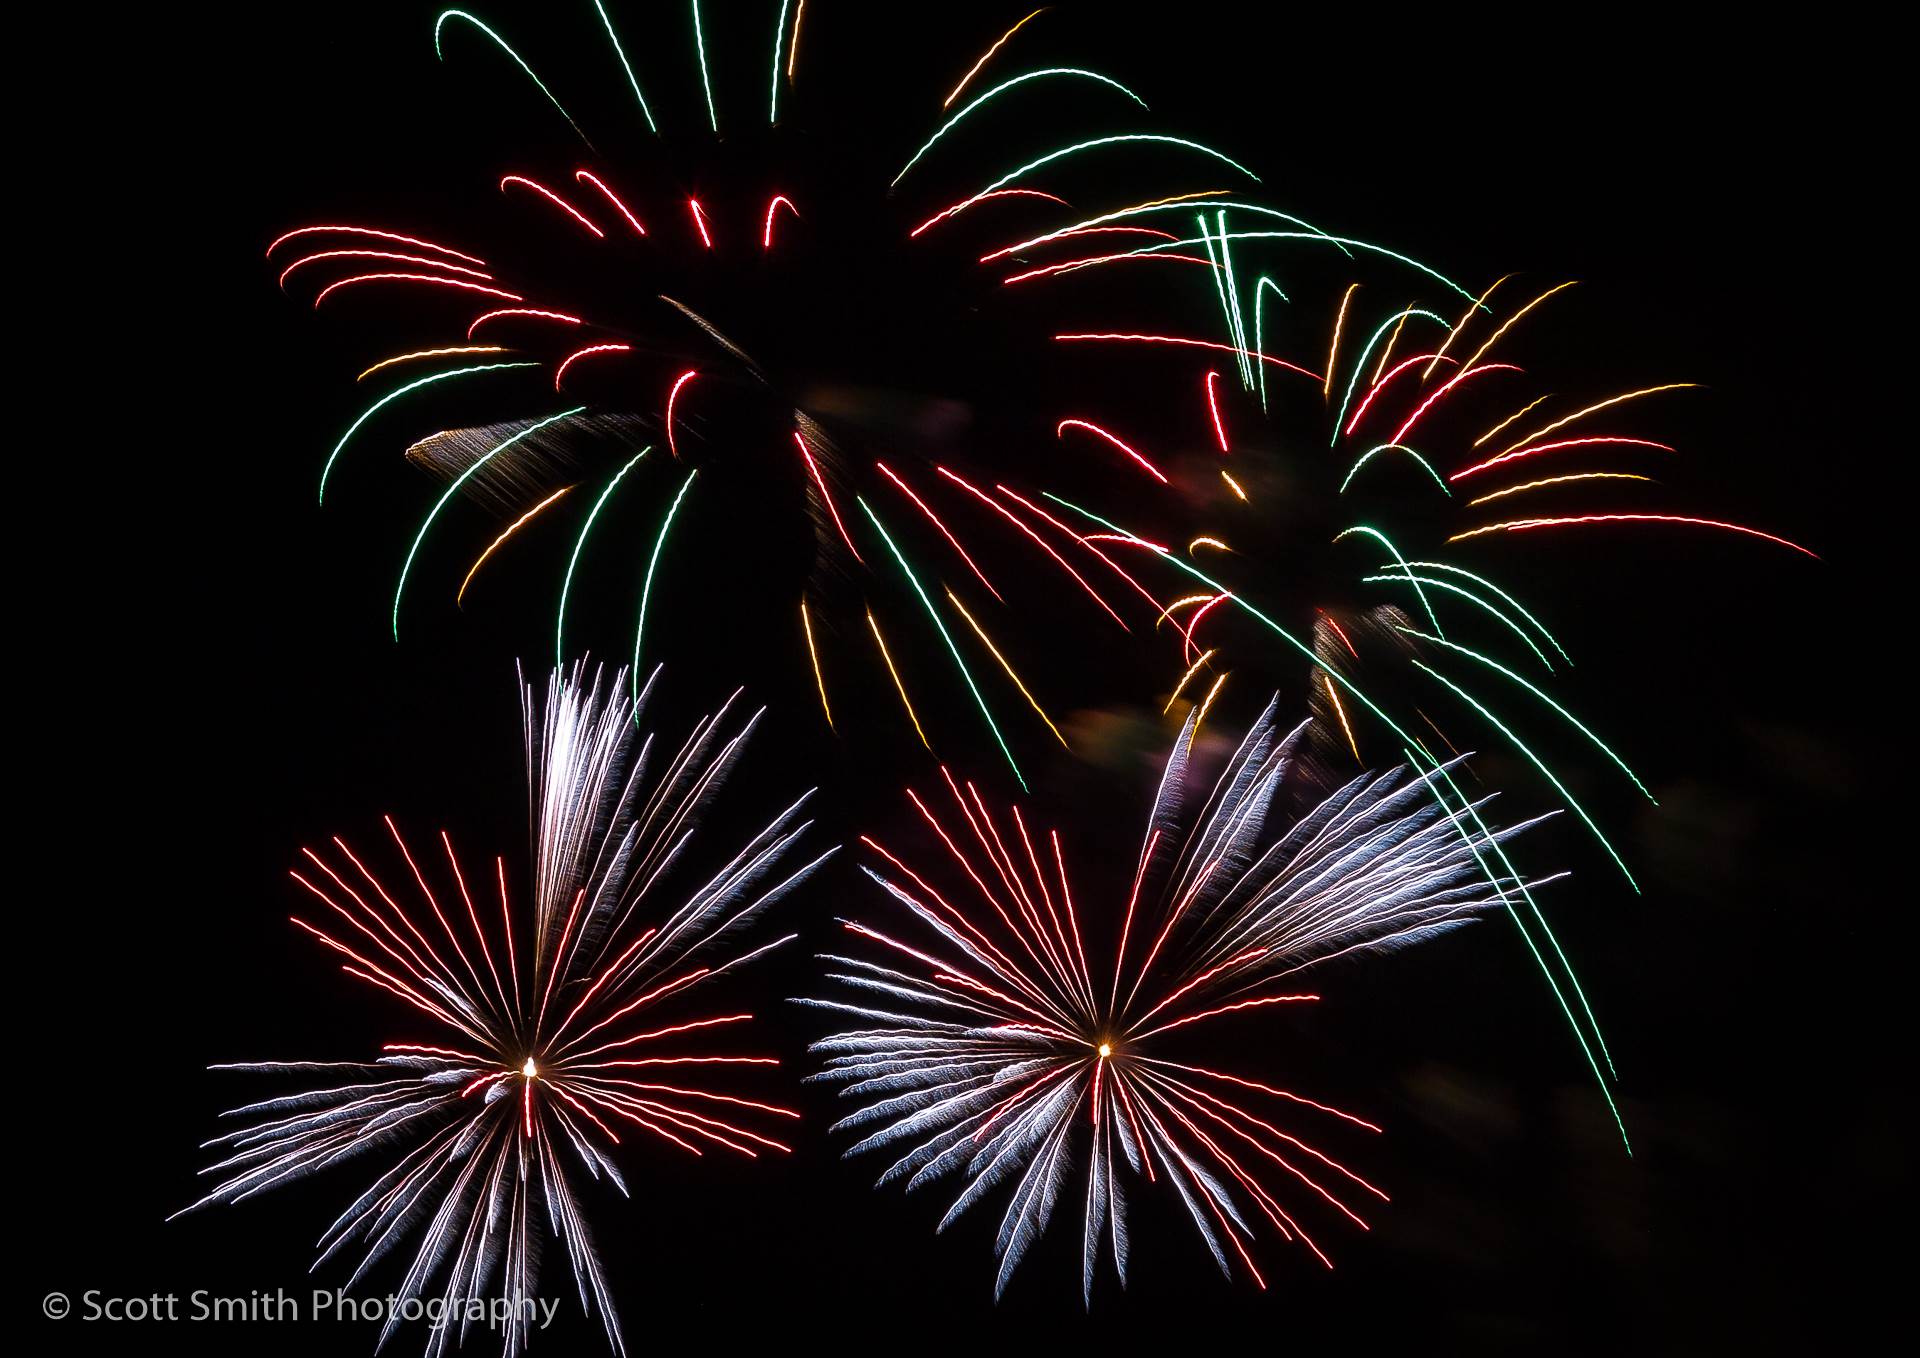 Fireworks in Denver The long, sparse trails create interesting patterns in the sky. by Scott Smith Photos